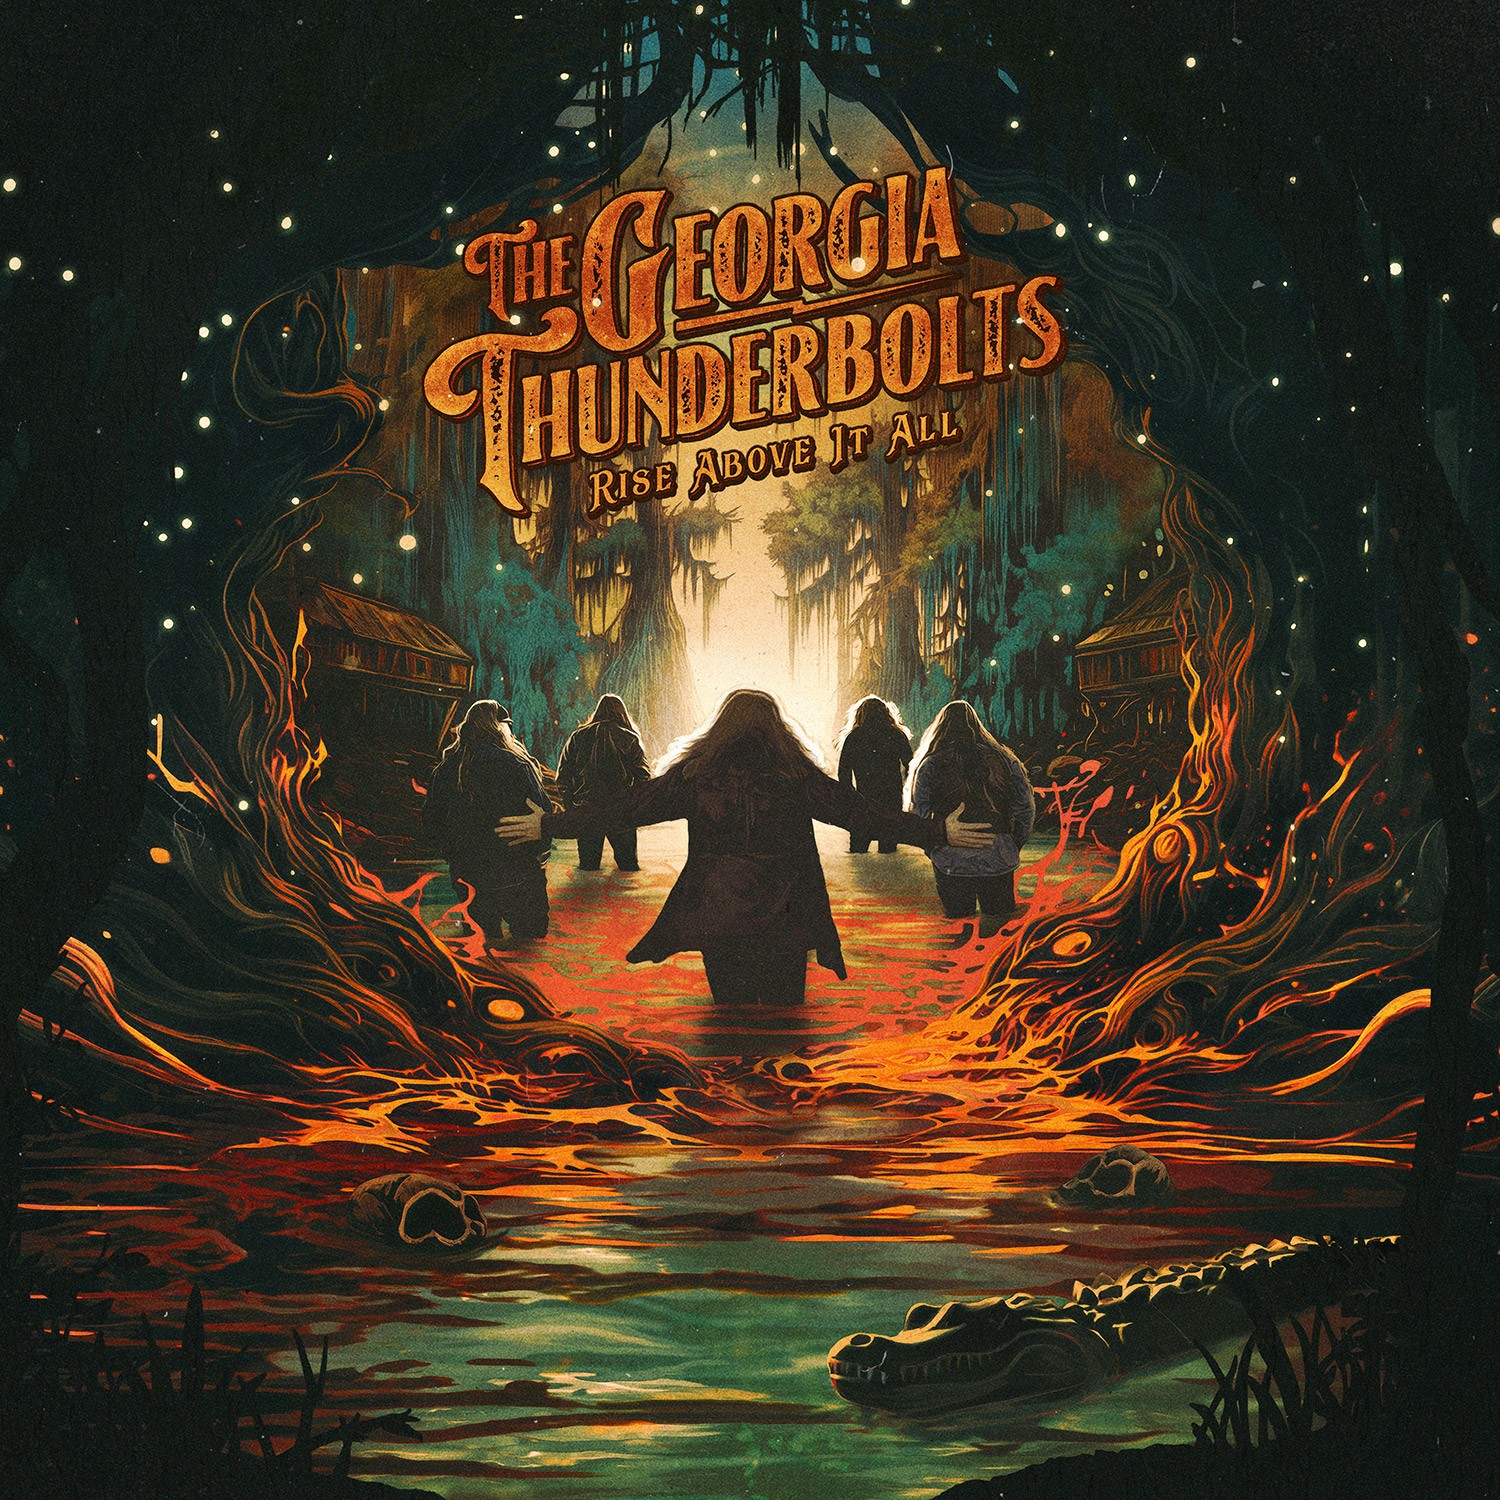 The Georgia Thunderbolts - Rise Above It All